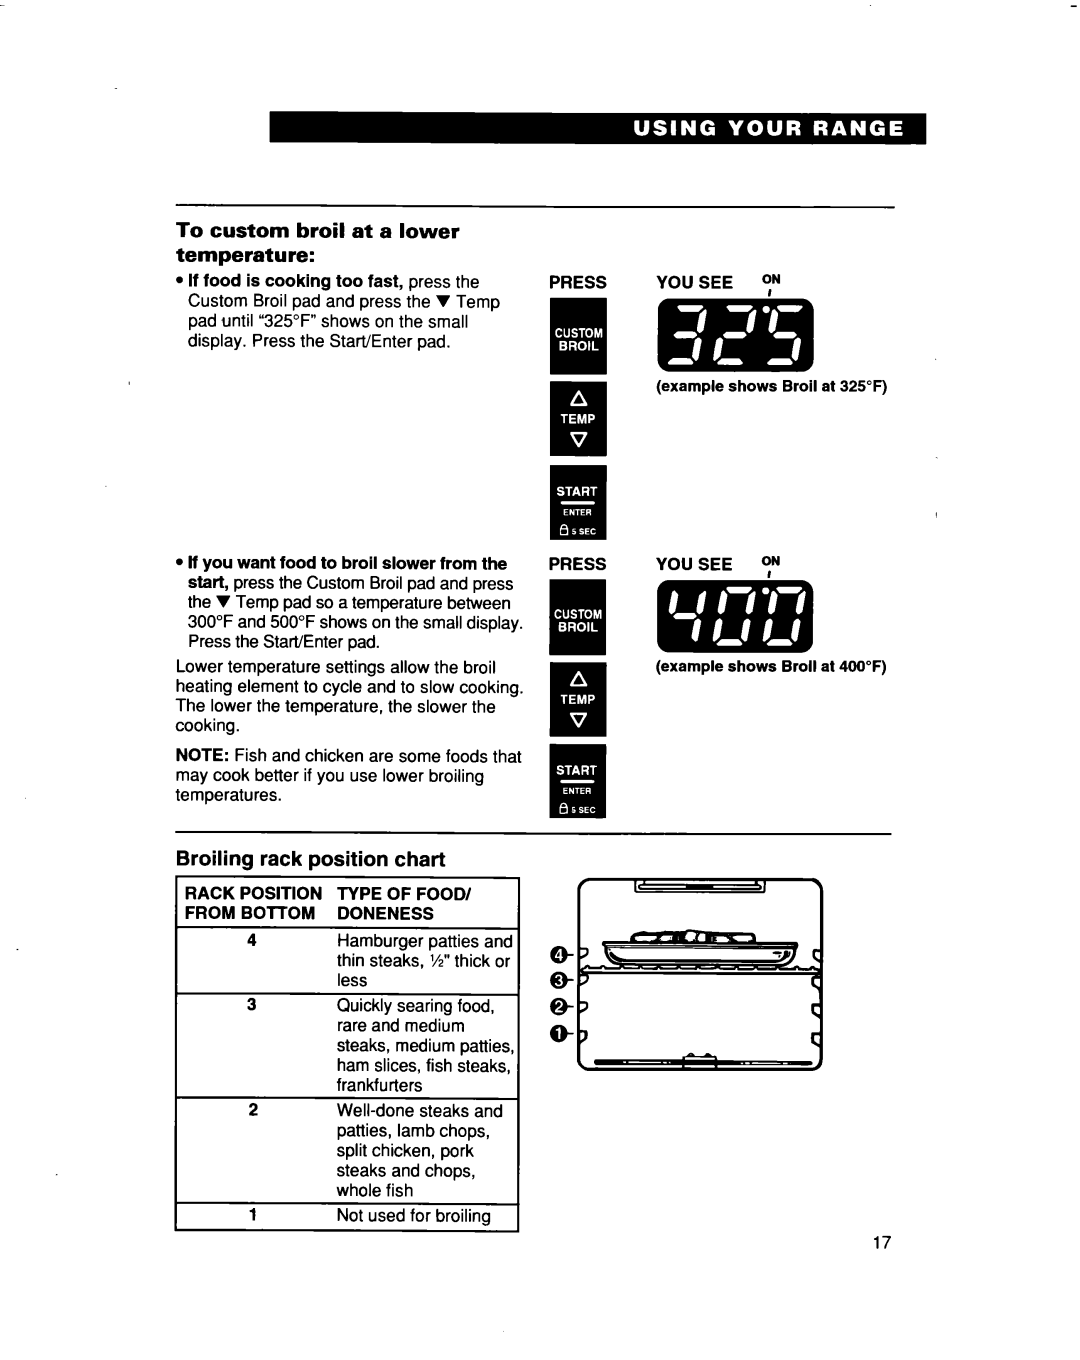 Whirlpool RF3663XD manual To custom broil at a lower temperature, Broiling rack position chart 